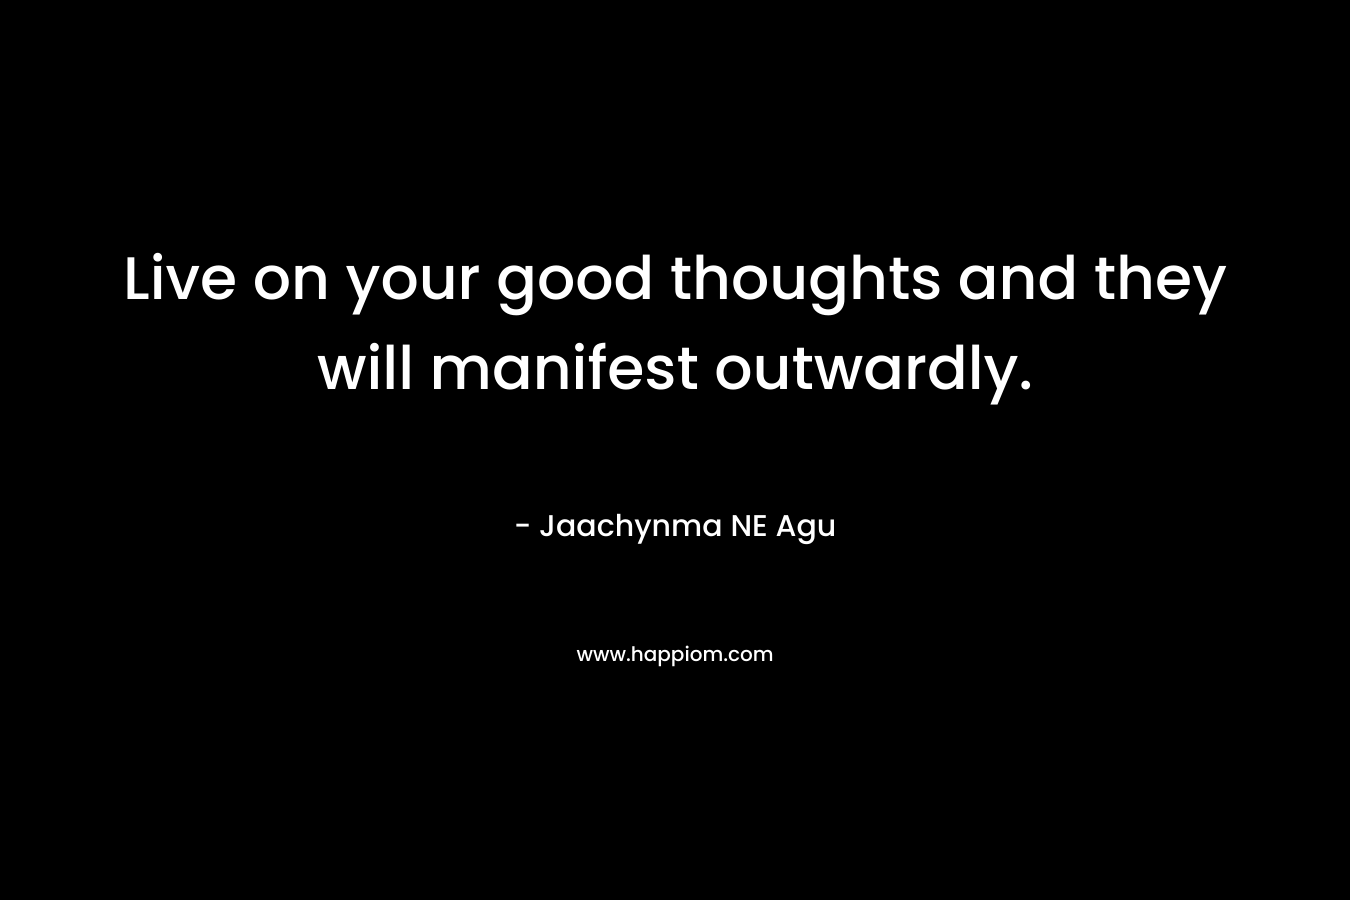 Live on your good thoughts and they will manifest outwardly.